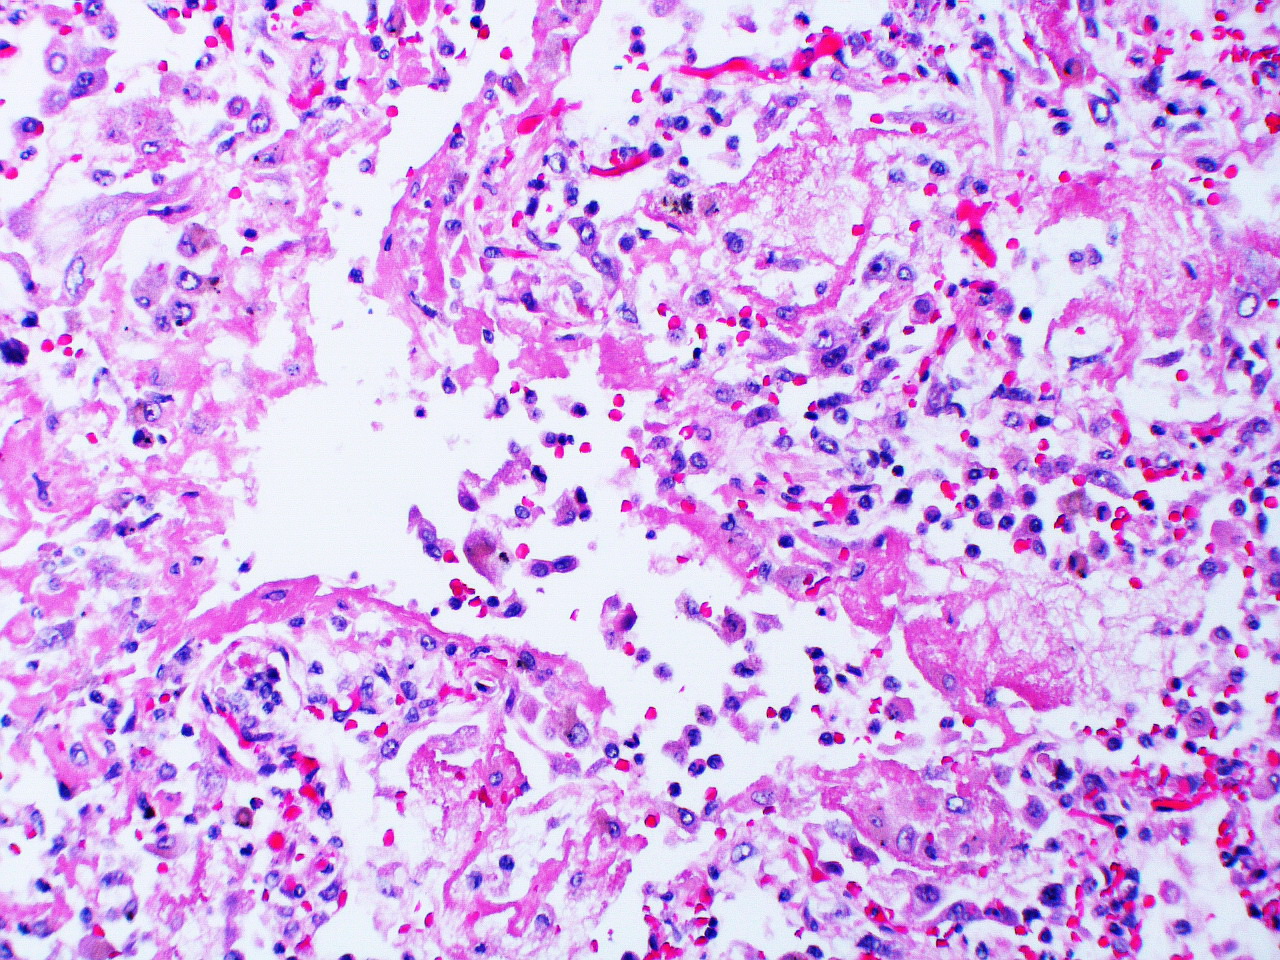 Histological slide of lung tissue showing a single distinct airspace with thickening of alveolar walls and debris accumulating in the air space.